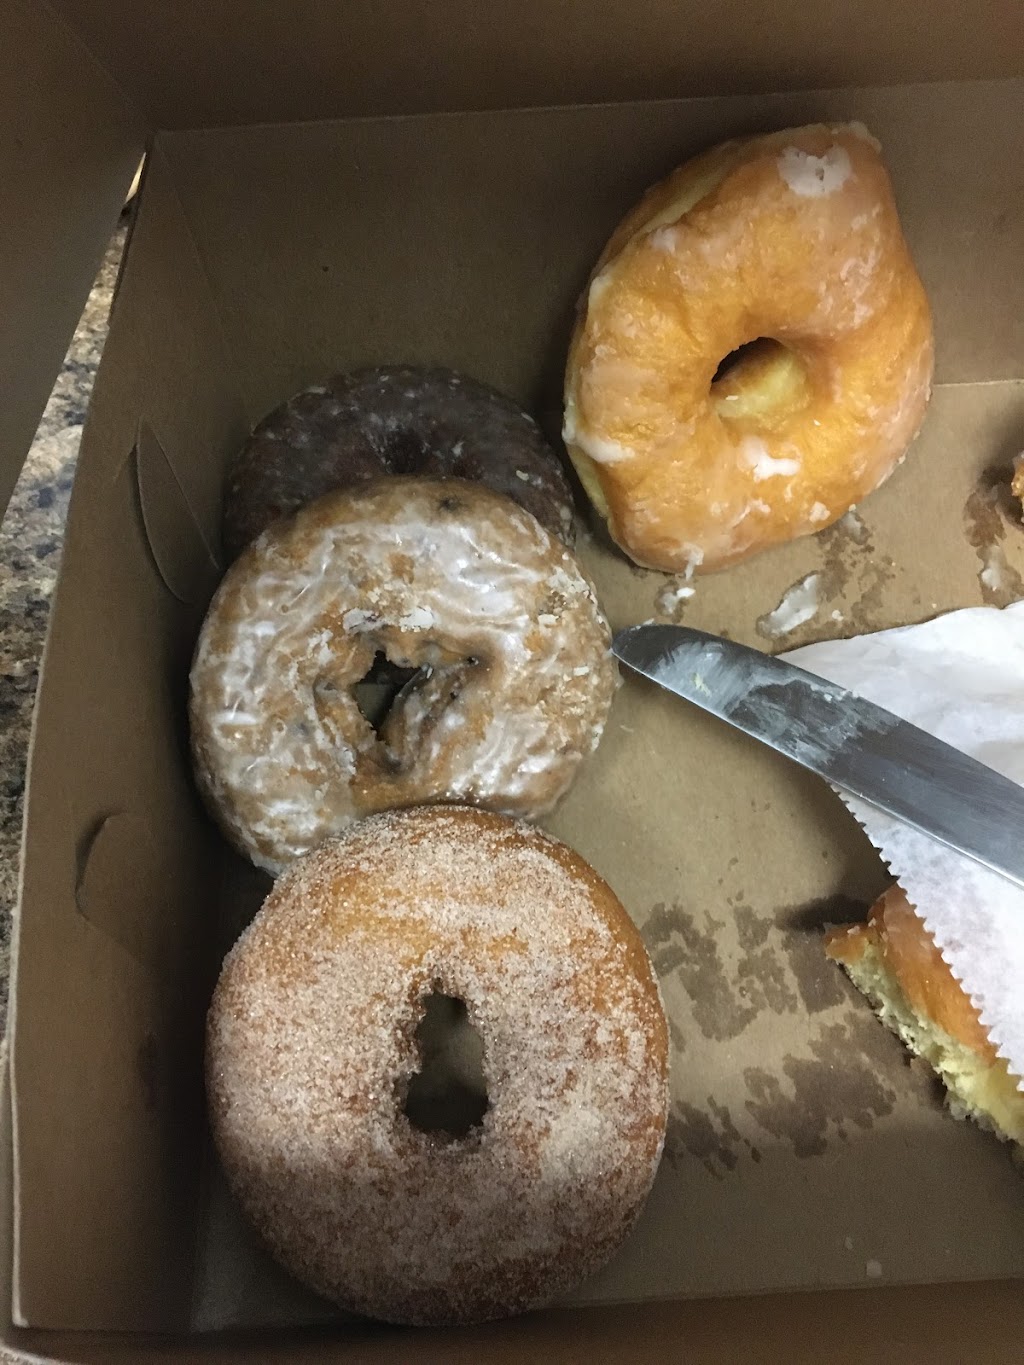 Shelby Donuts | 47050 Dequindre Rd, Shelby Township, MI 48317, USA | Phone: (586) 739-6908